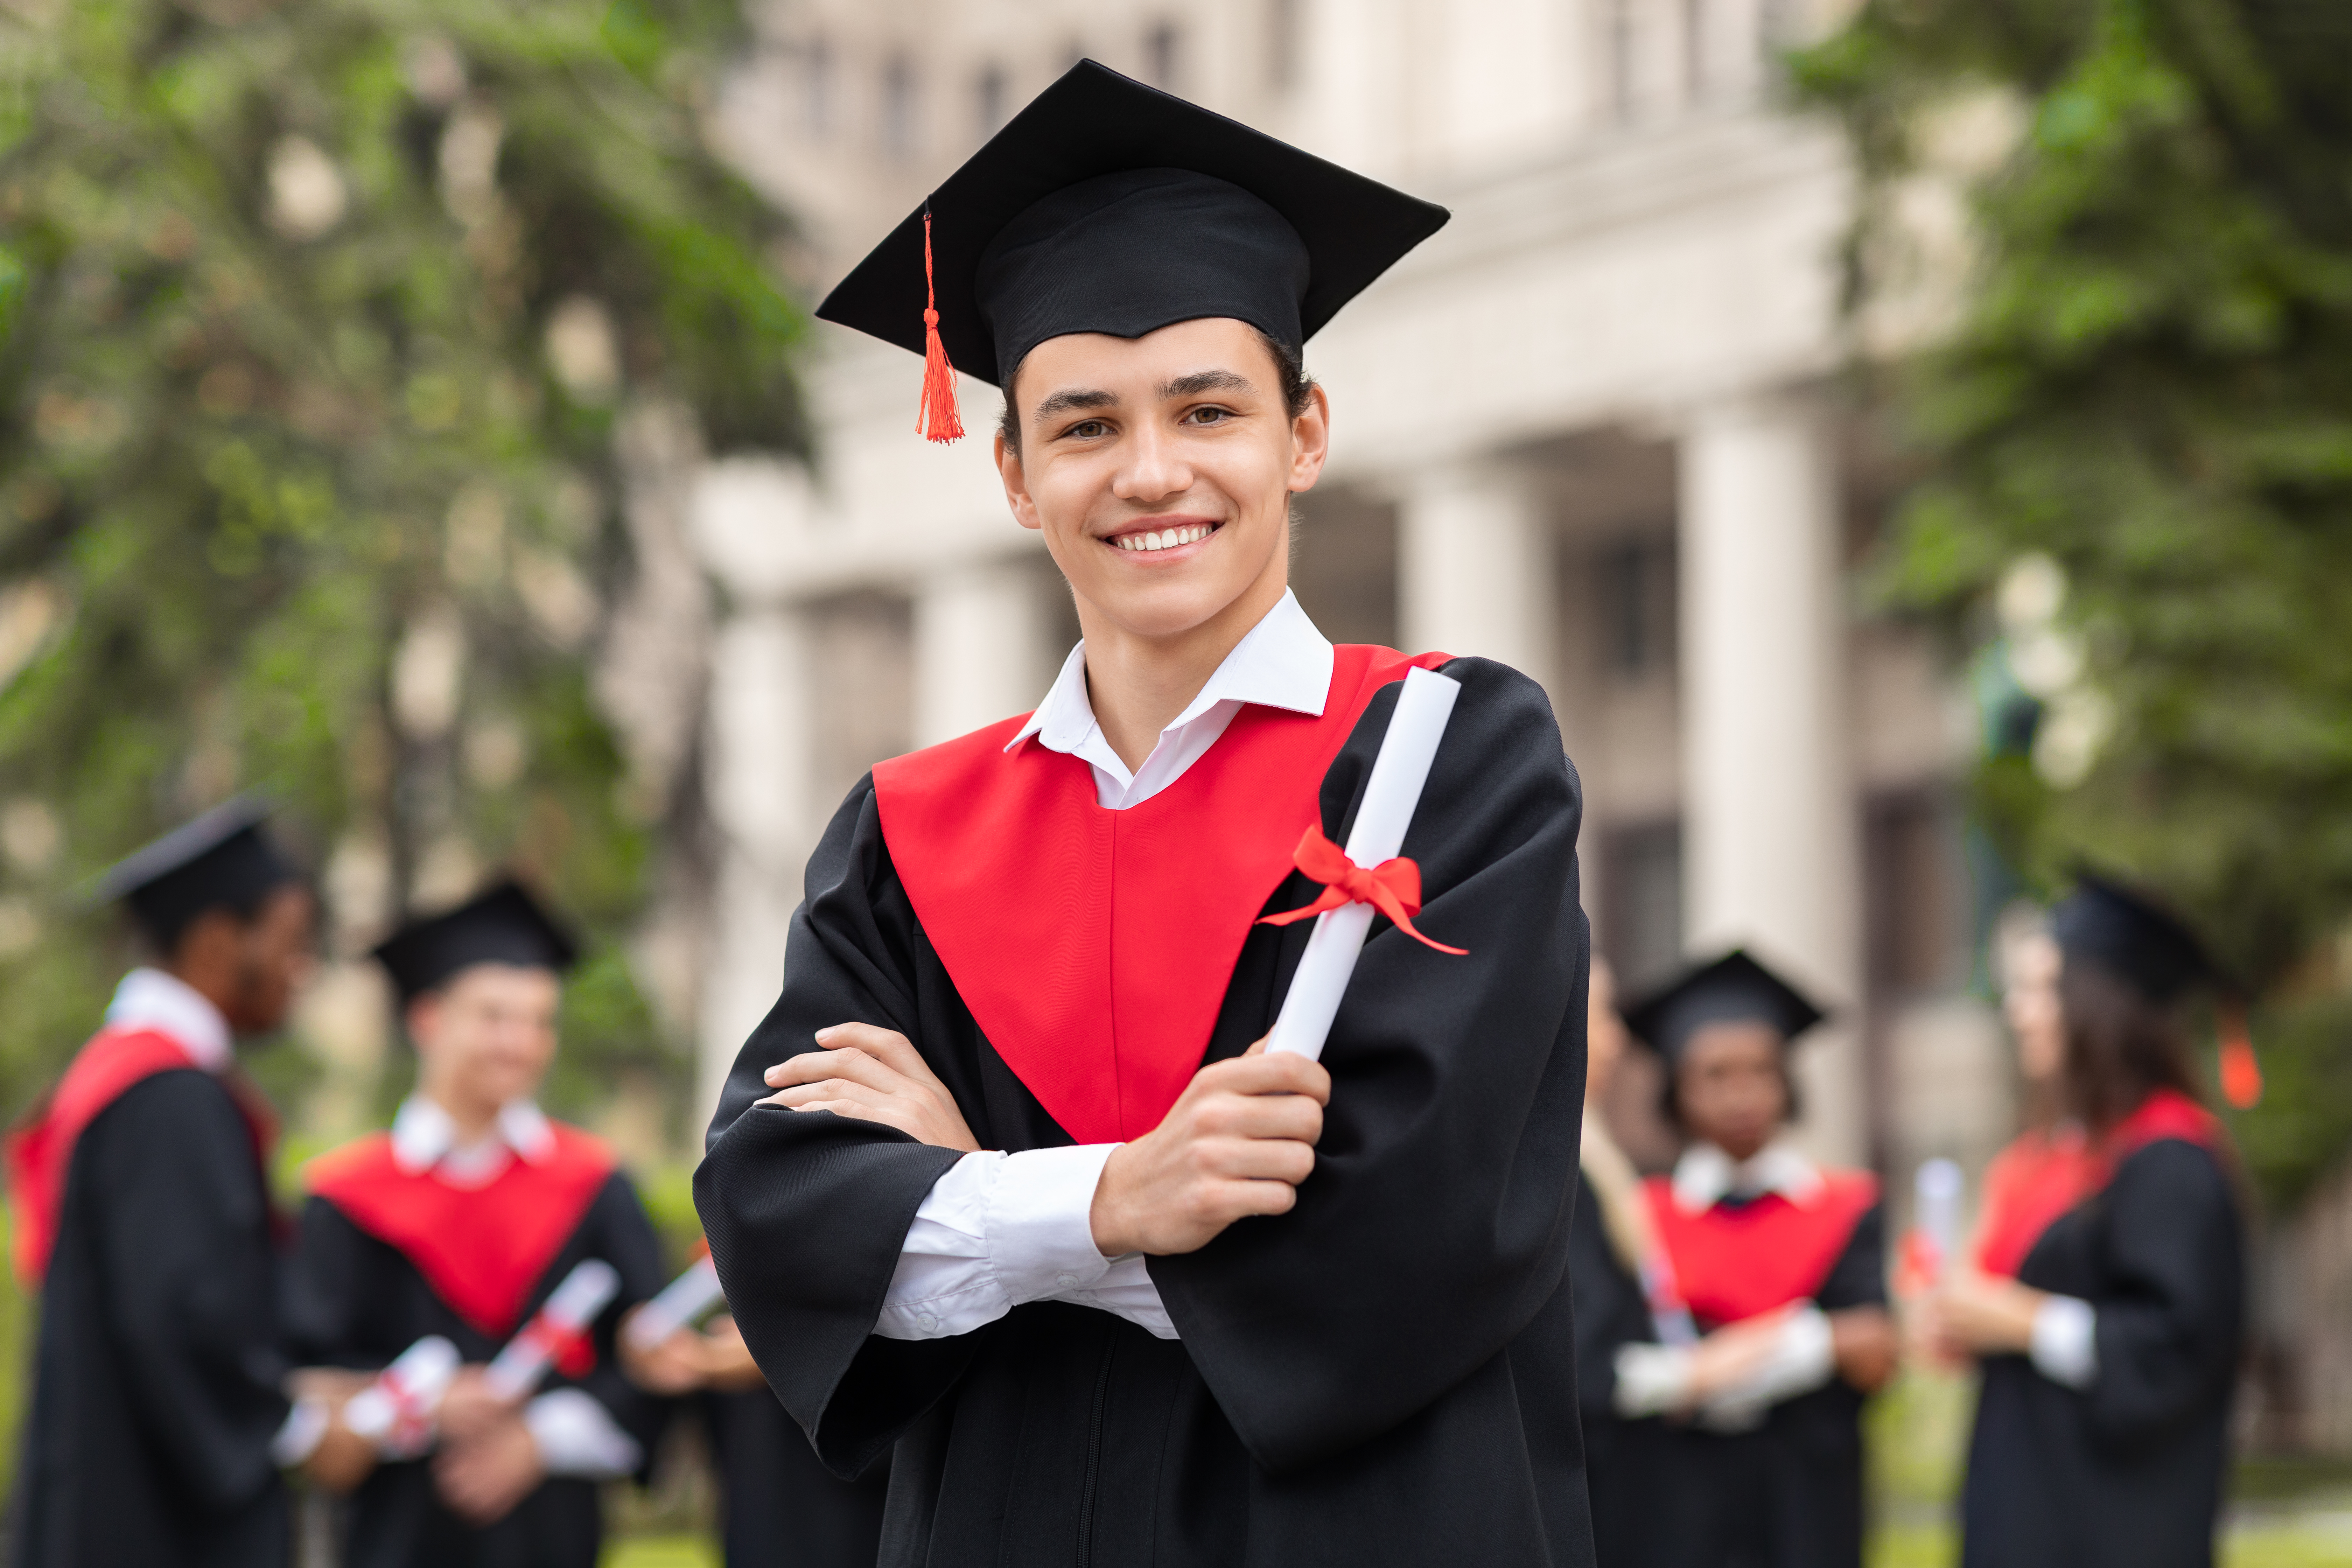 Cheerful guy in graduation costume showing his diploma and smiling at camera. | Source: Shutterstock